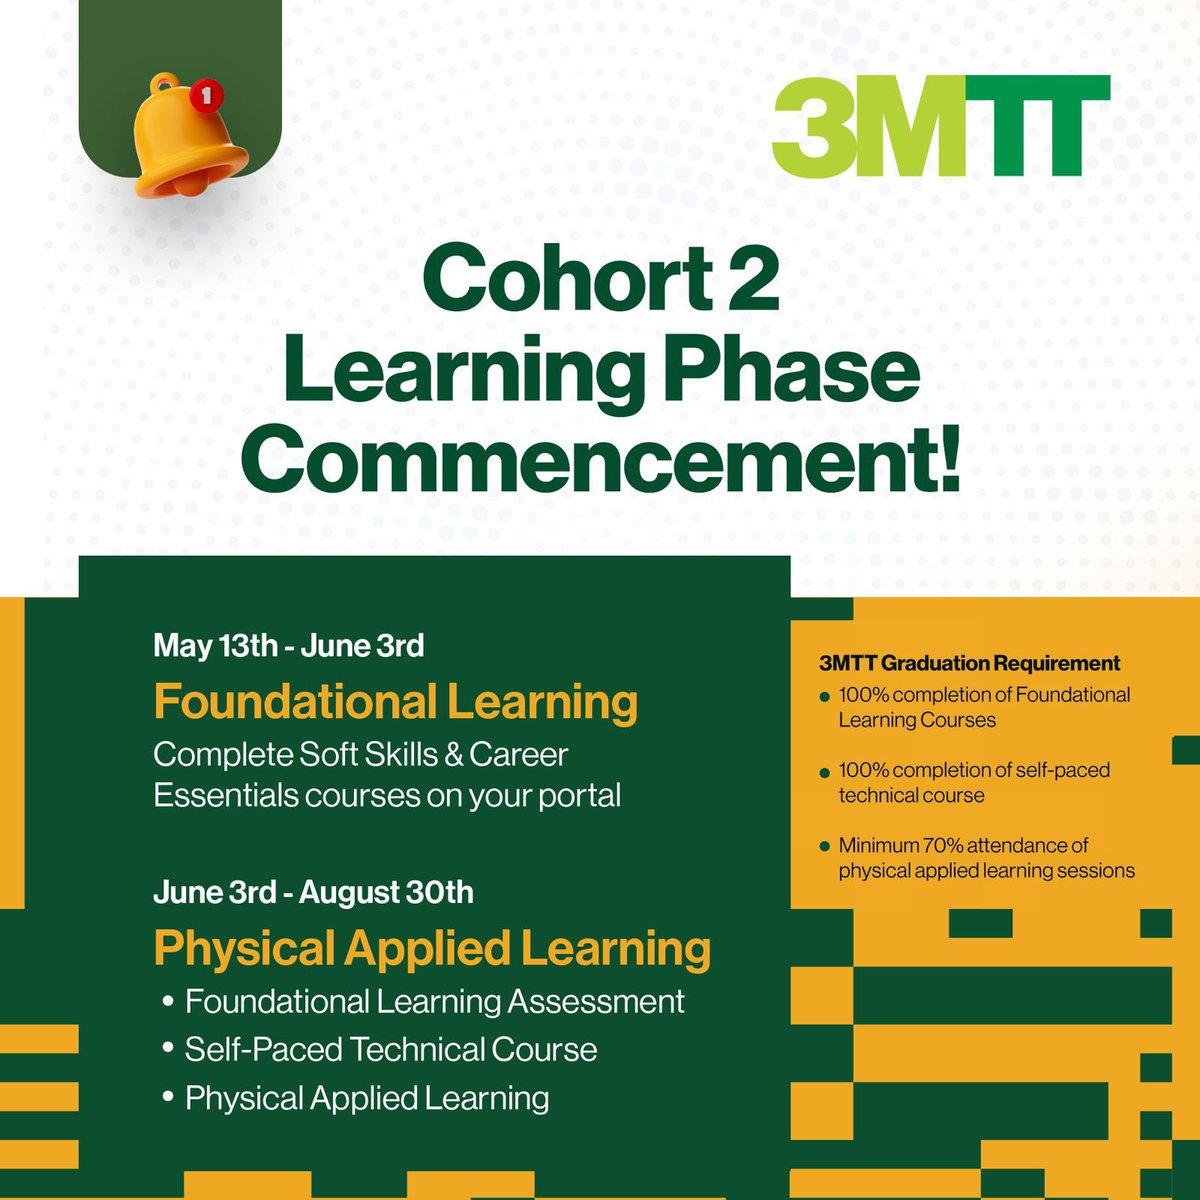 It’s Official! 🚀🚀🚀

We are pleased to announce the commencement of the learning phase for Cohort 2! As you begin your learning journey with us, there is much to anticipate and experience and we hope you are as excited as we are!